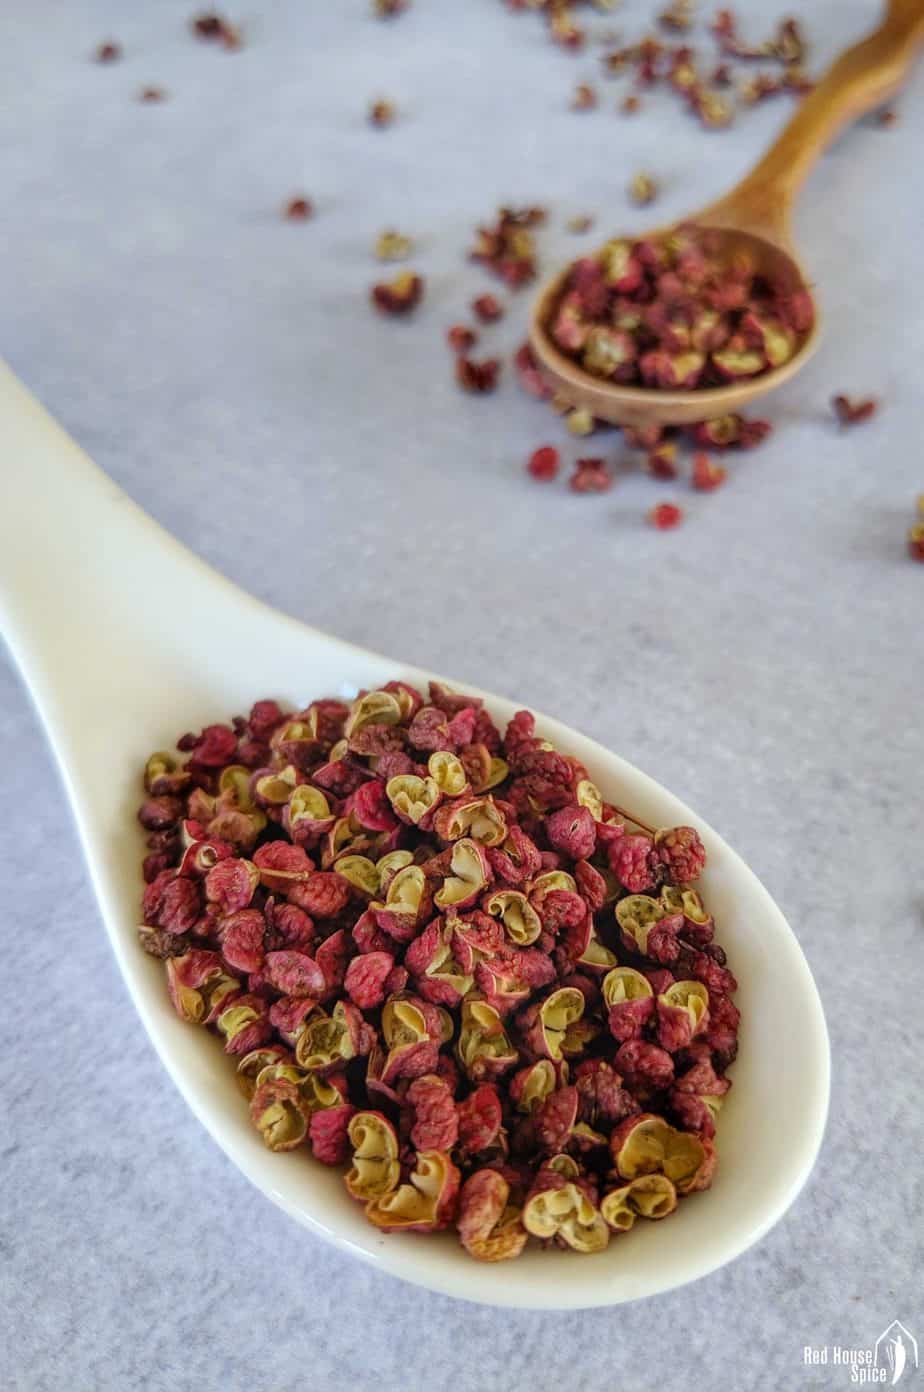 Two spoonful of Sichuan pepper.